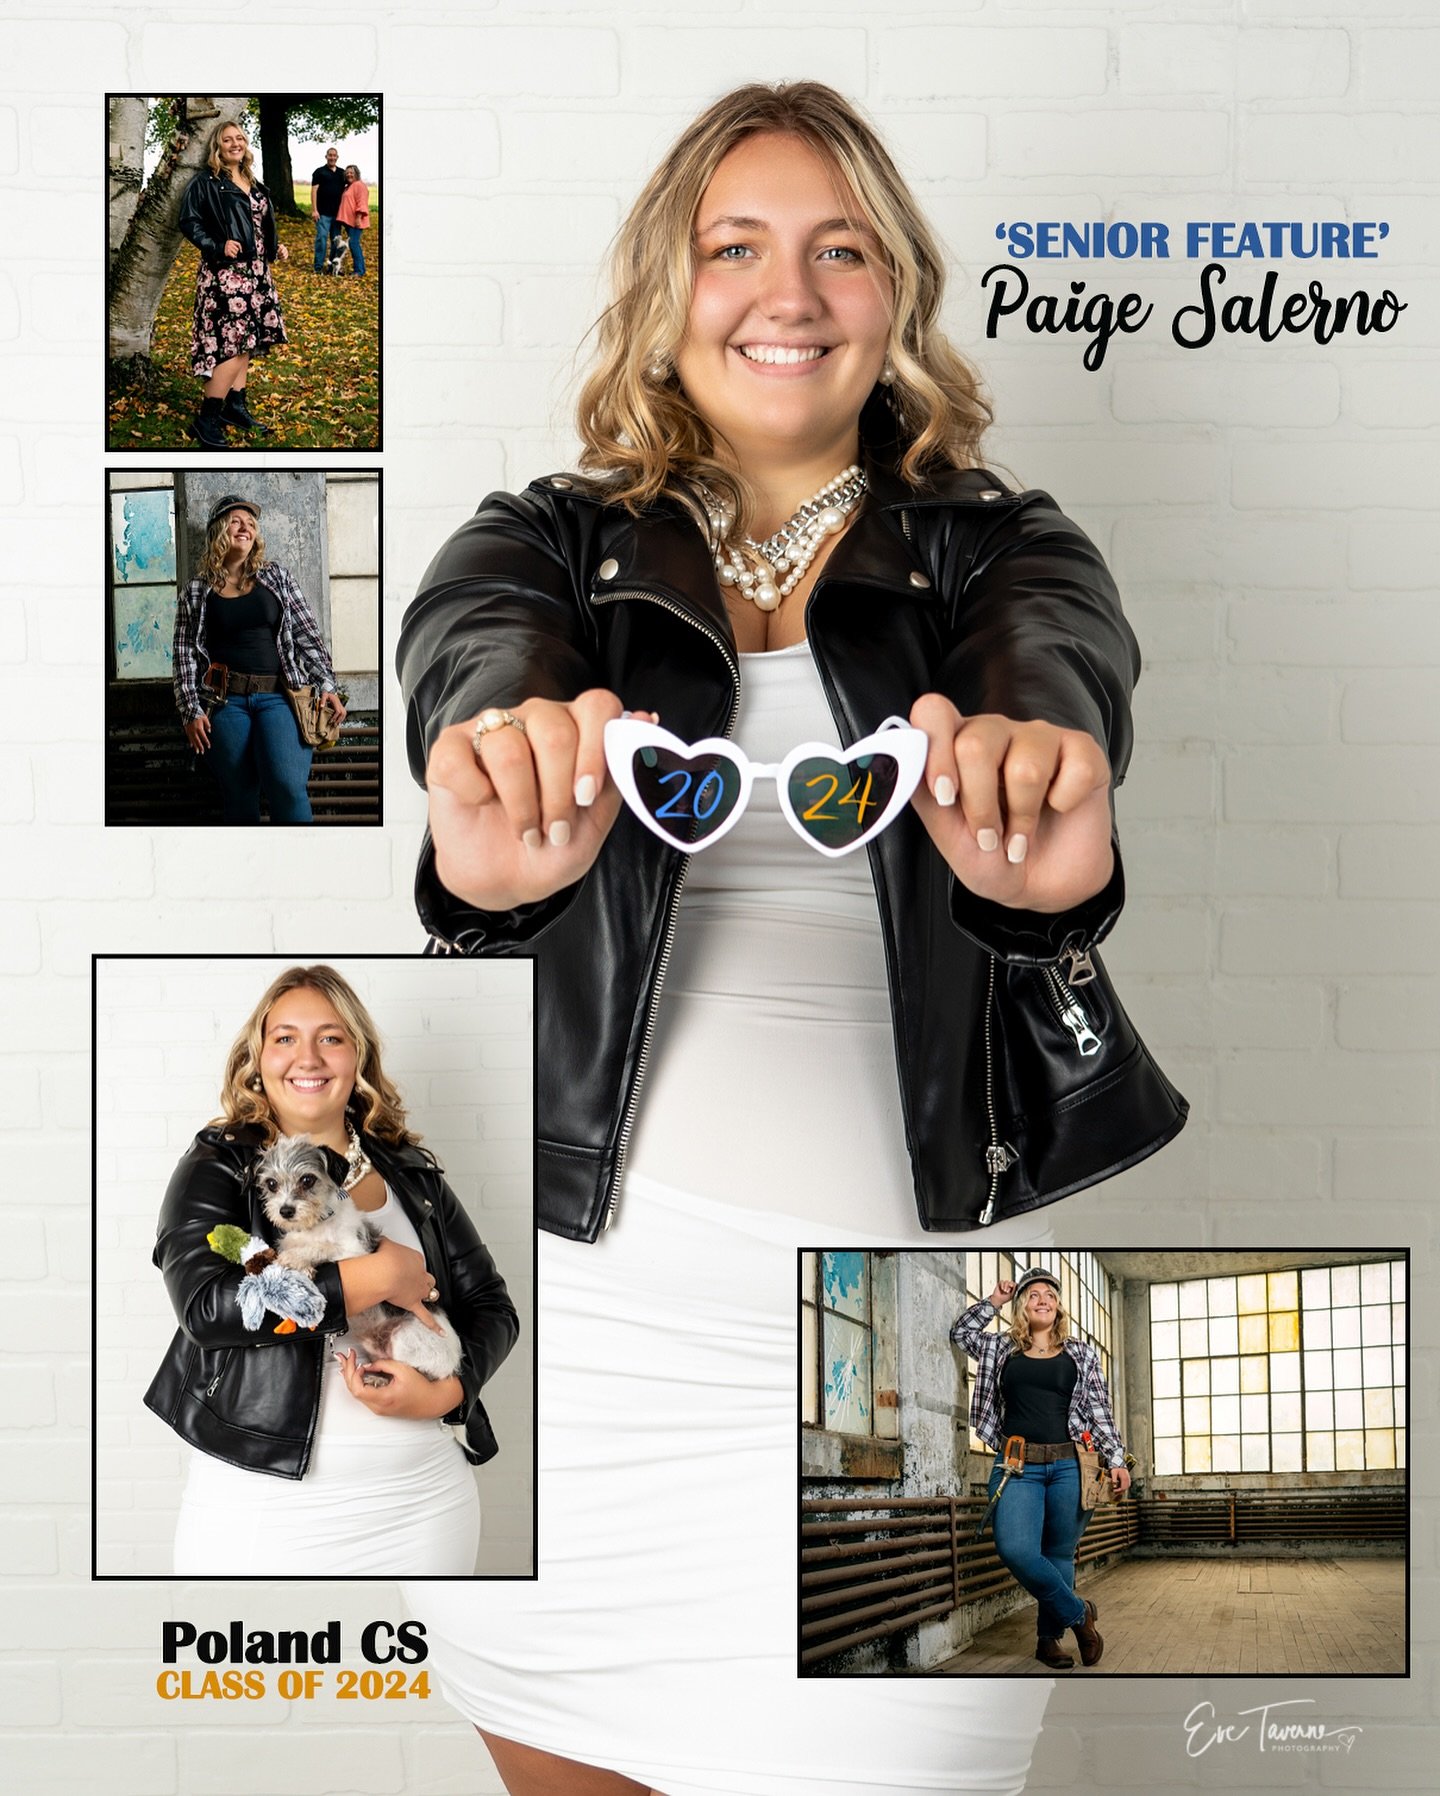 SENIOR FEATURE! Paige Salerno 
Poland Central School 
#Classof2024
#ETPSeniorFeature 

Congratulations Paige on your high school career, and all the best to you on your future endeavors. I&rsquo;m so grateful for the opportunity to photograph this am